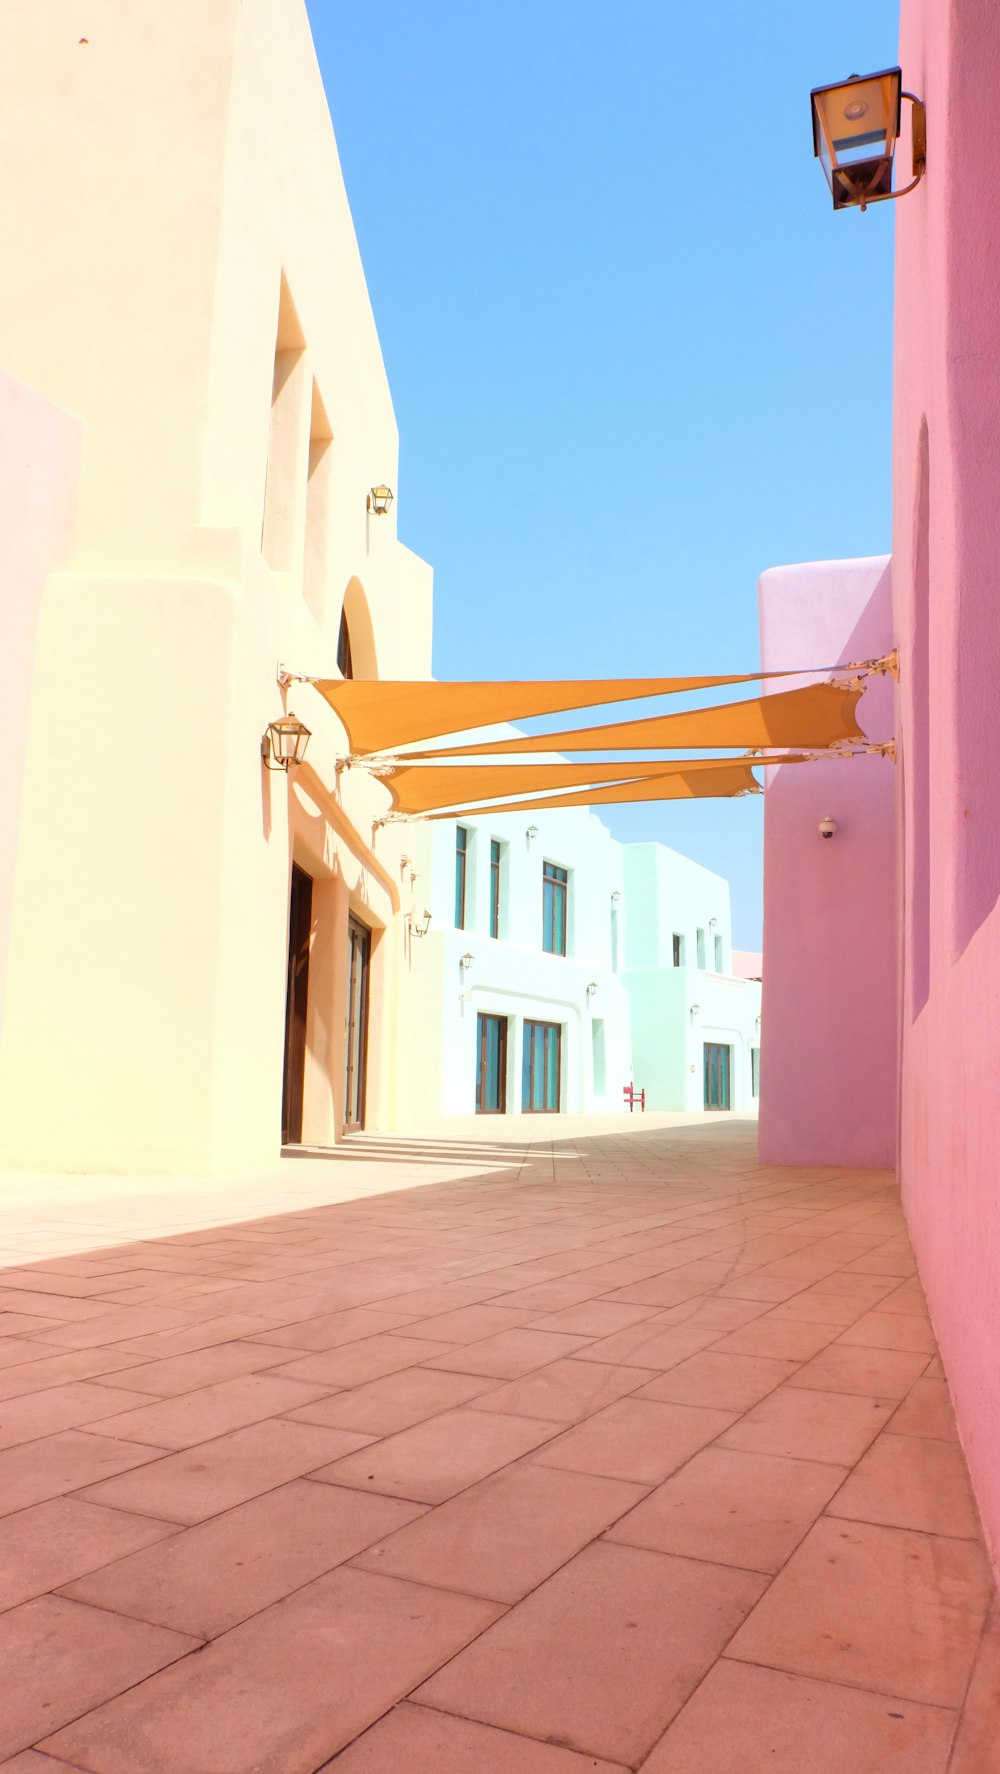 a pink building with a yellow awning next to it